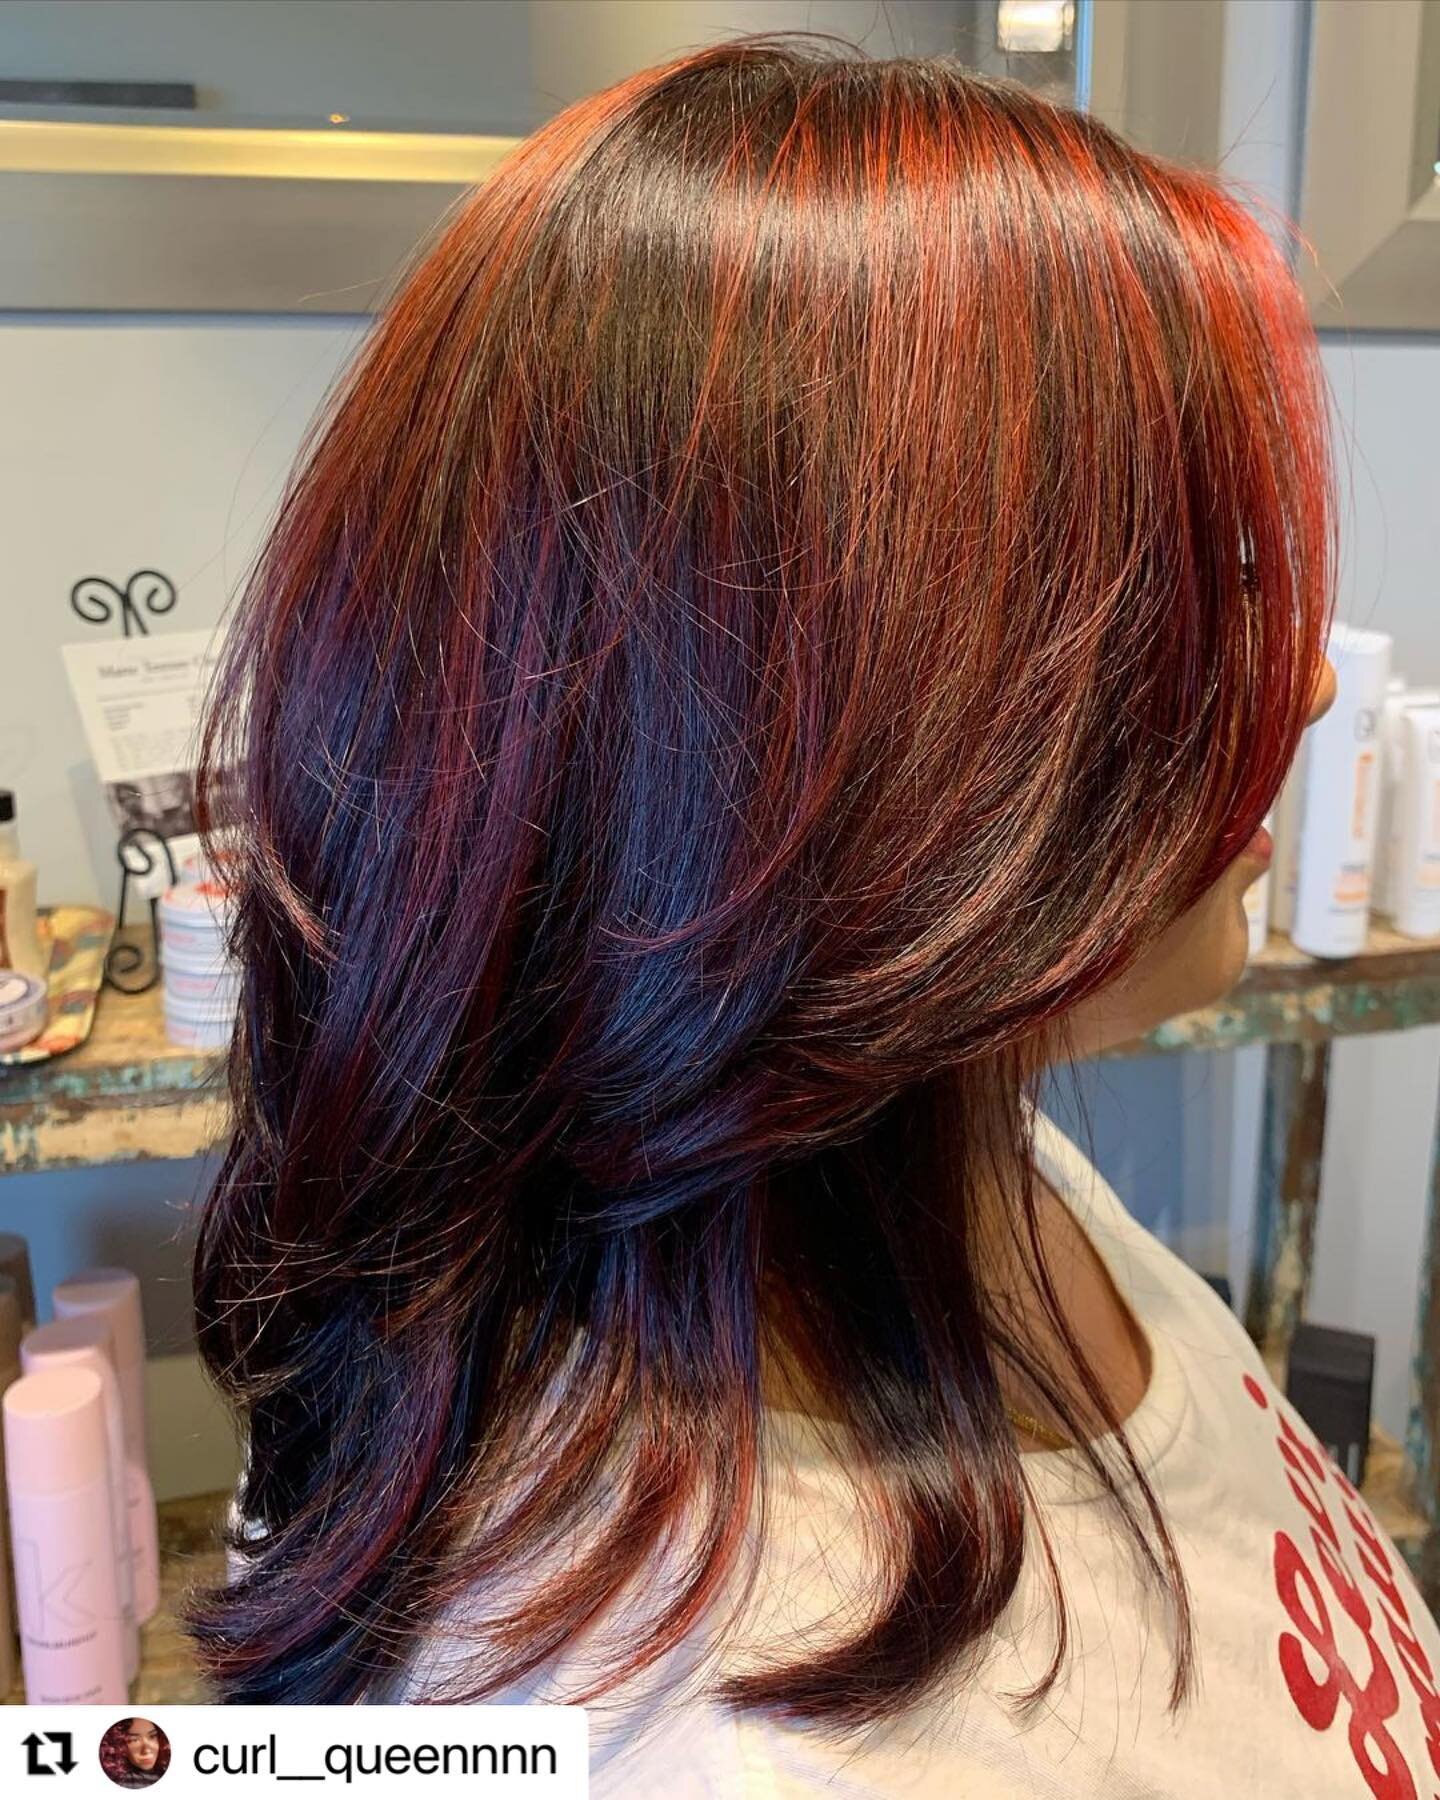 #Repost @curl__queennnn with @make_repost
・・・
Thank you @bonnyparihar for letting me do your amazing hair! 🍒
.
.
.
.
.
. 
 @saloncapellifranklin 
#keunecolor#franklin#balayagedandpainted